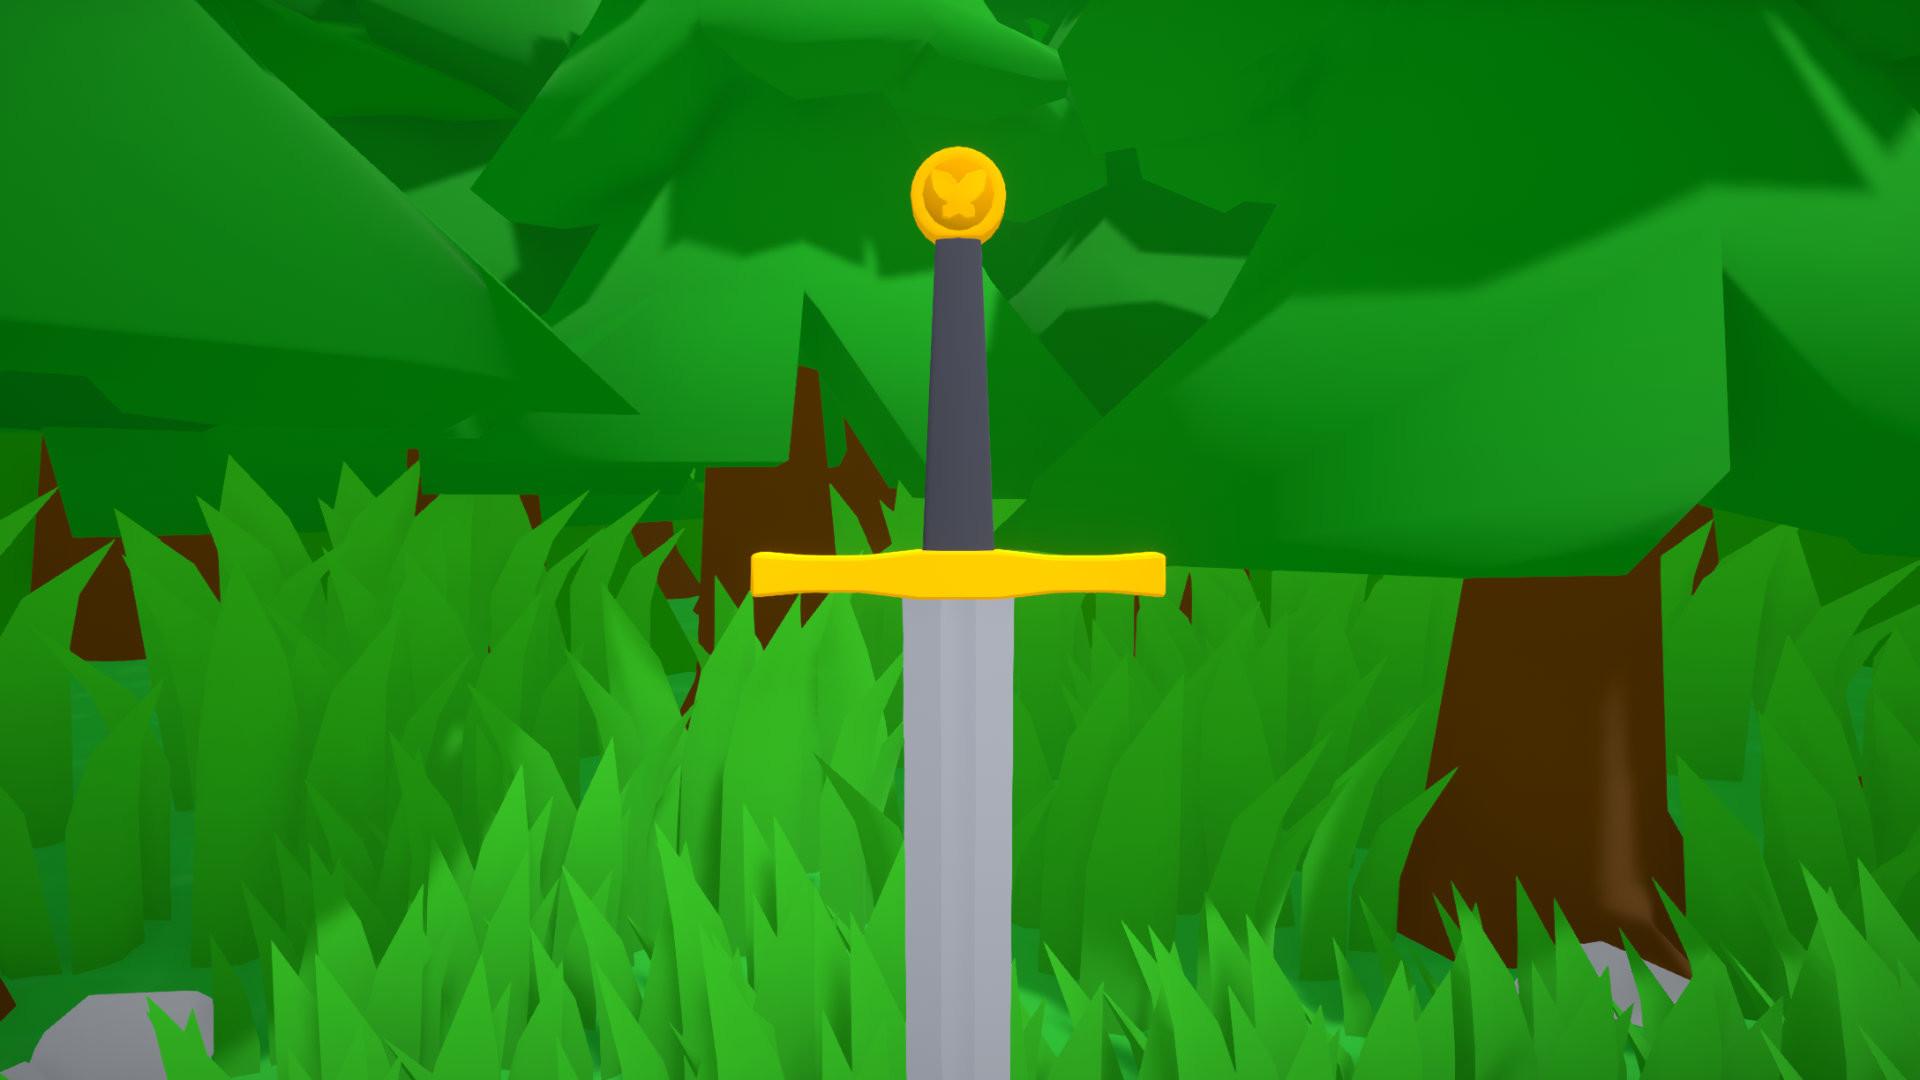 Screenshot №4 from game The one who pulls out the sword will be crowned king